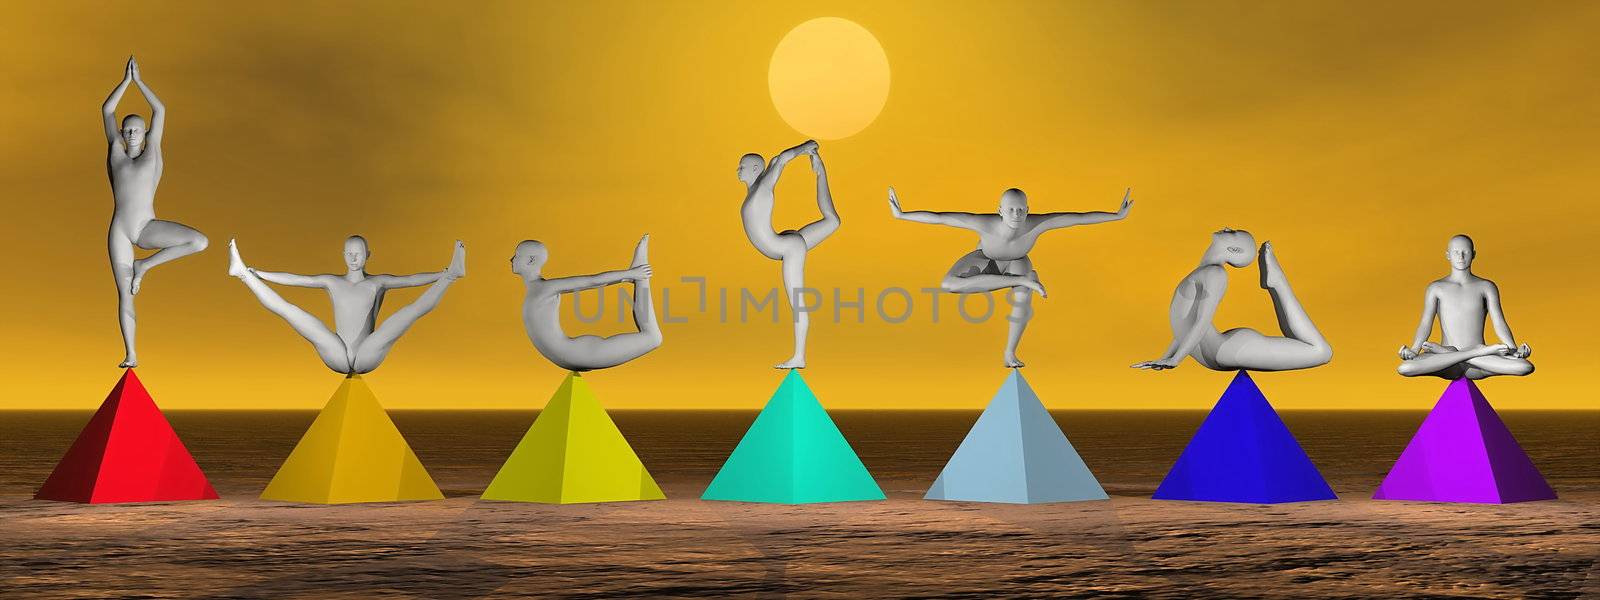 Yoga postures on seven colorful prymids for chakras by brown sunset